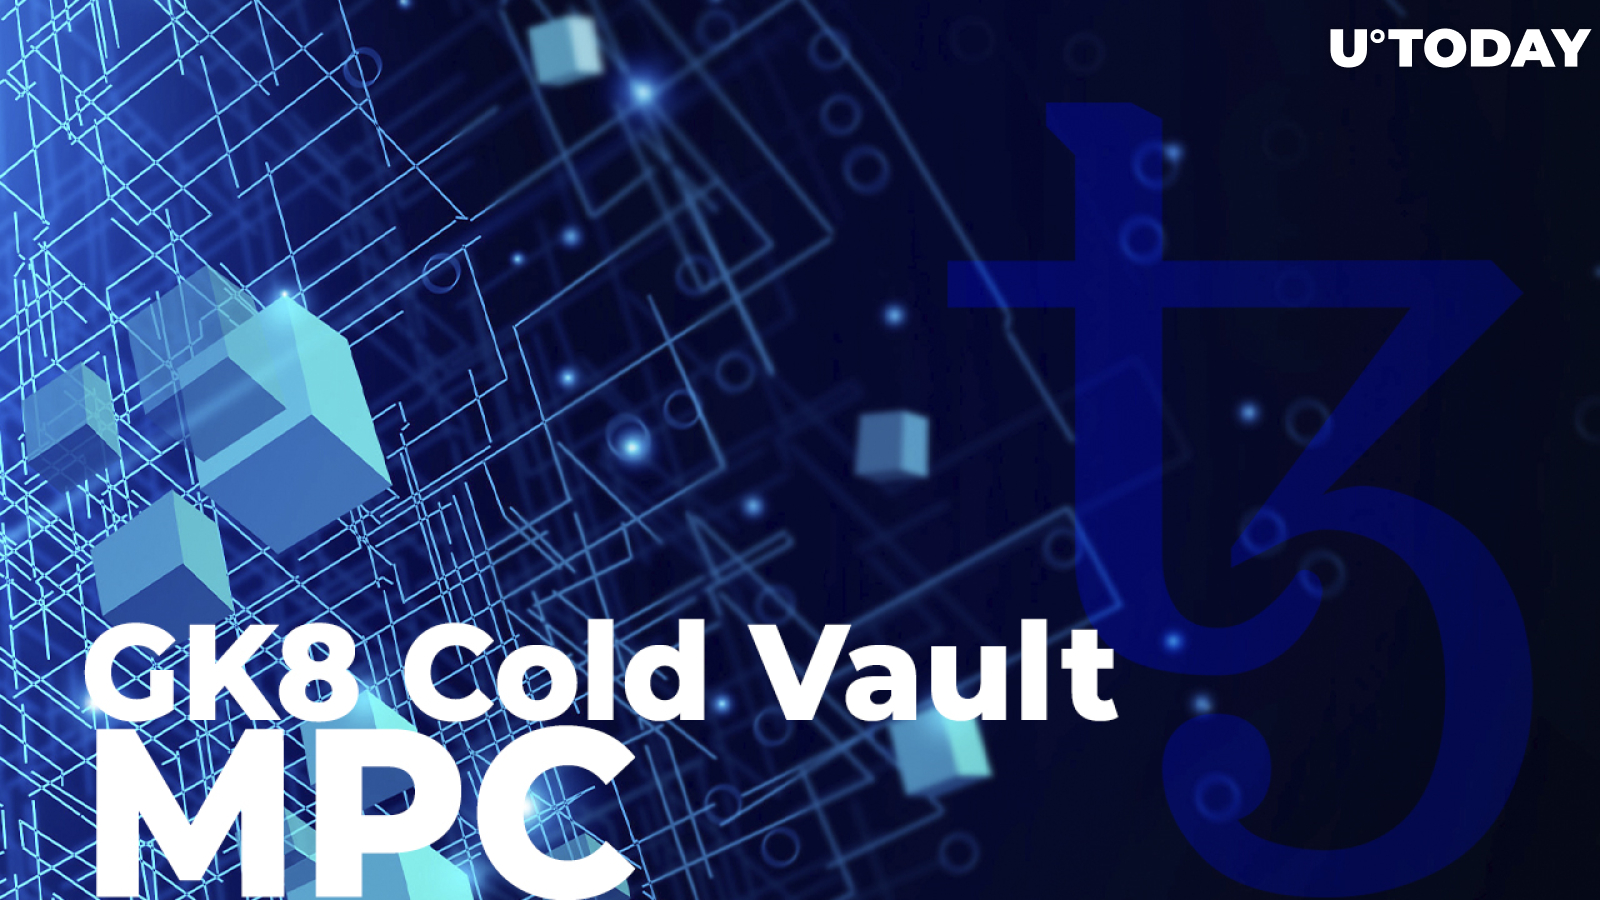 GK8 Cold Vault and MPC Solutions Provider to Start Tezos Blockchain Support 